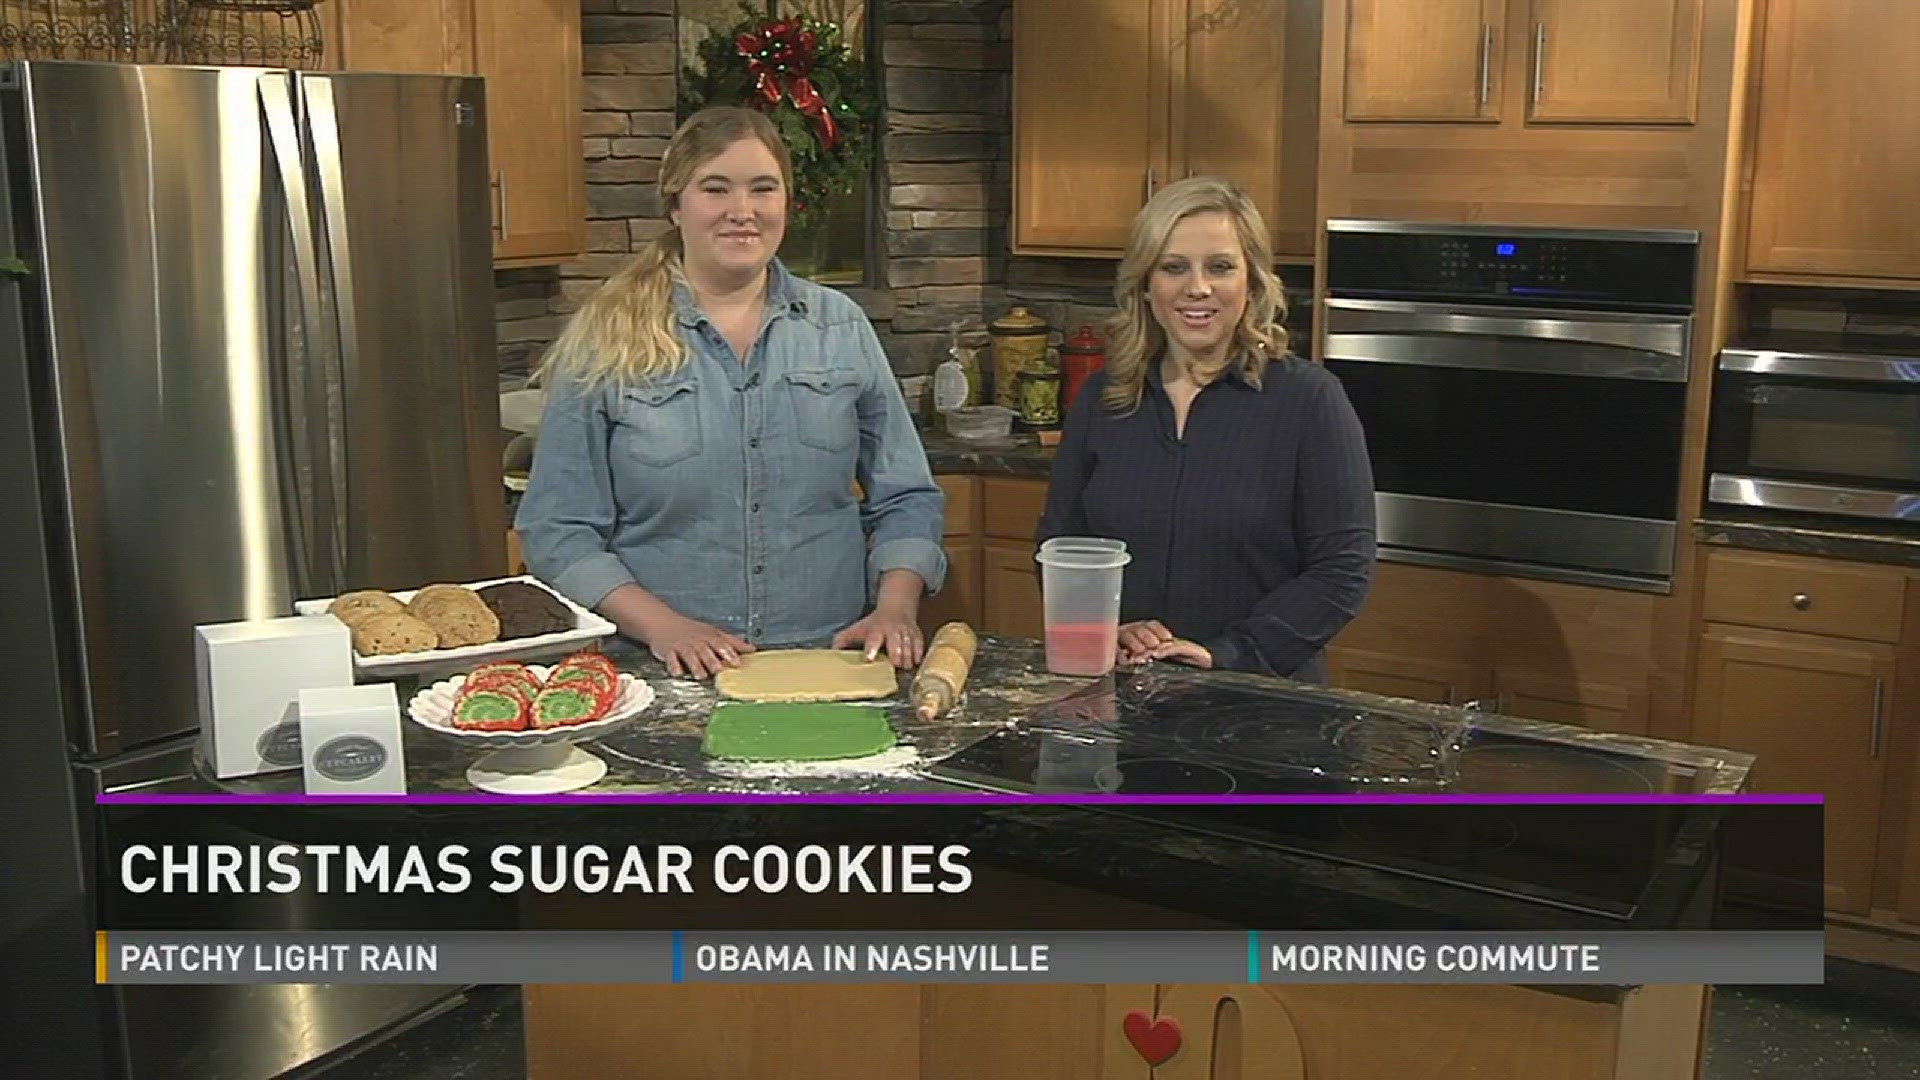 The Cupcakery makes sugar cookies for Christmas